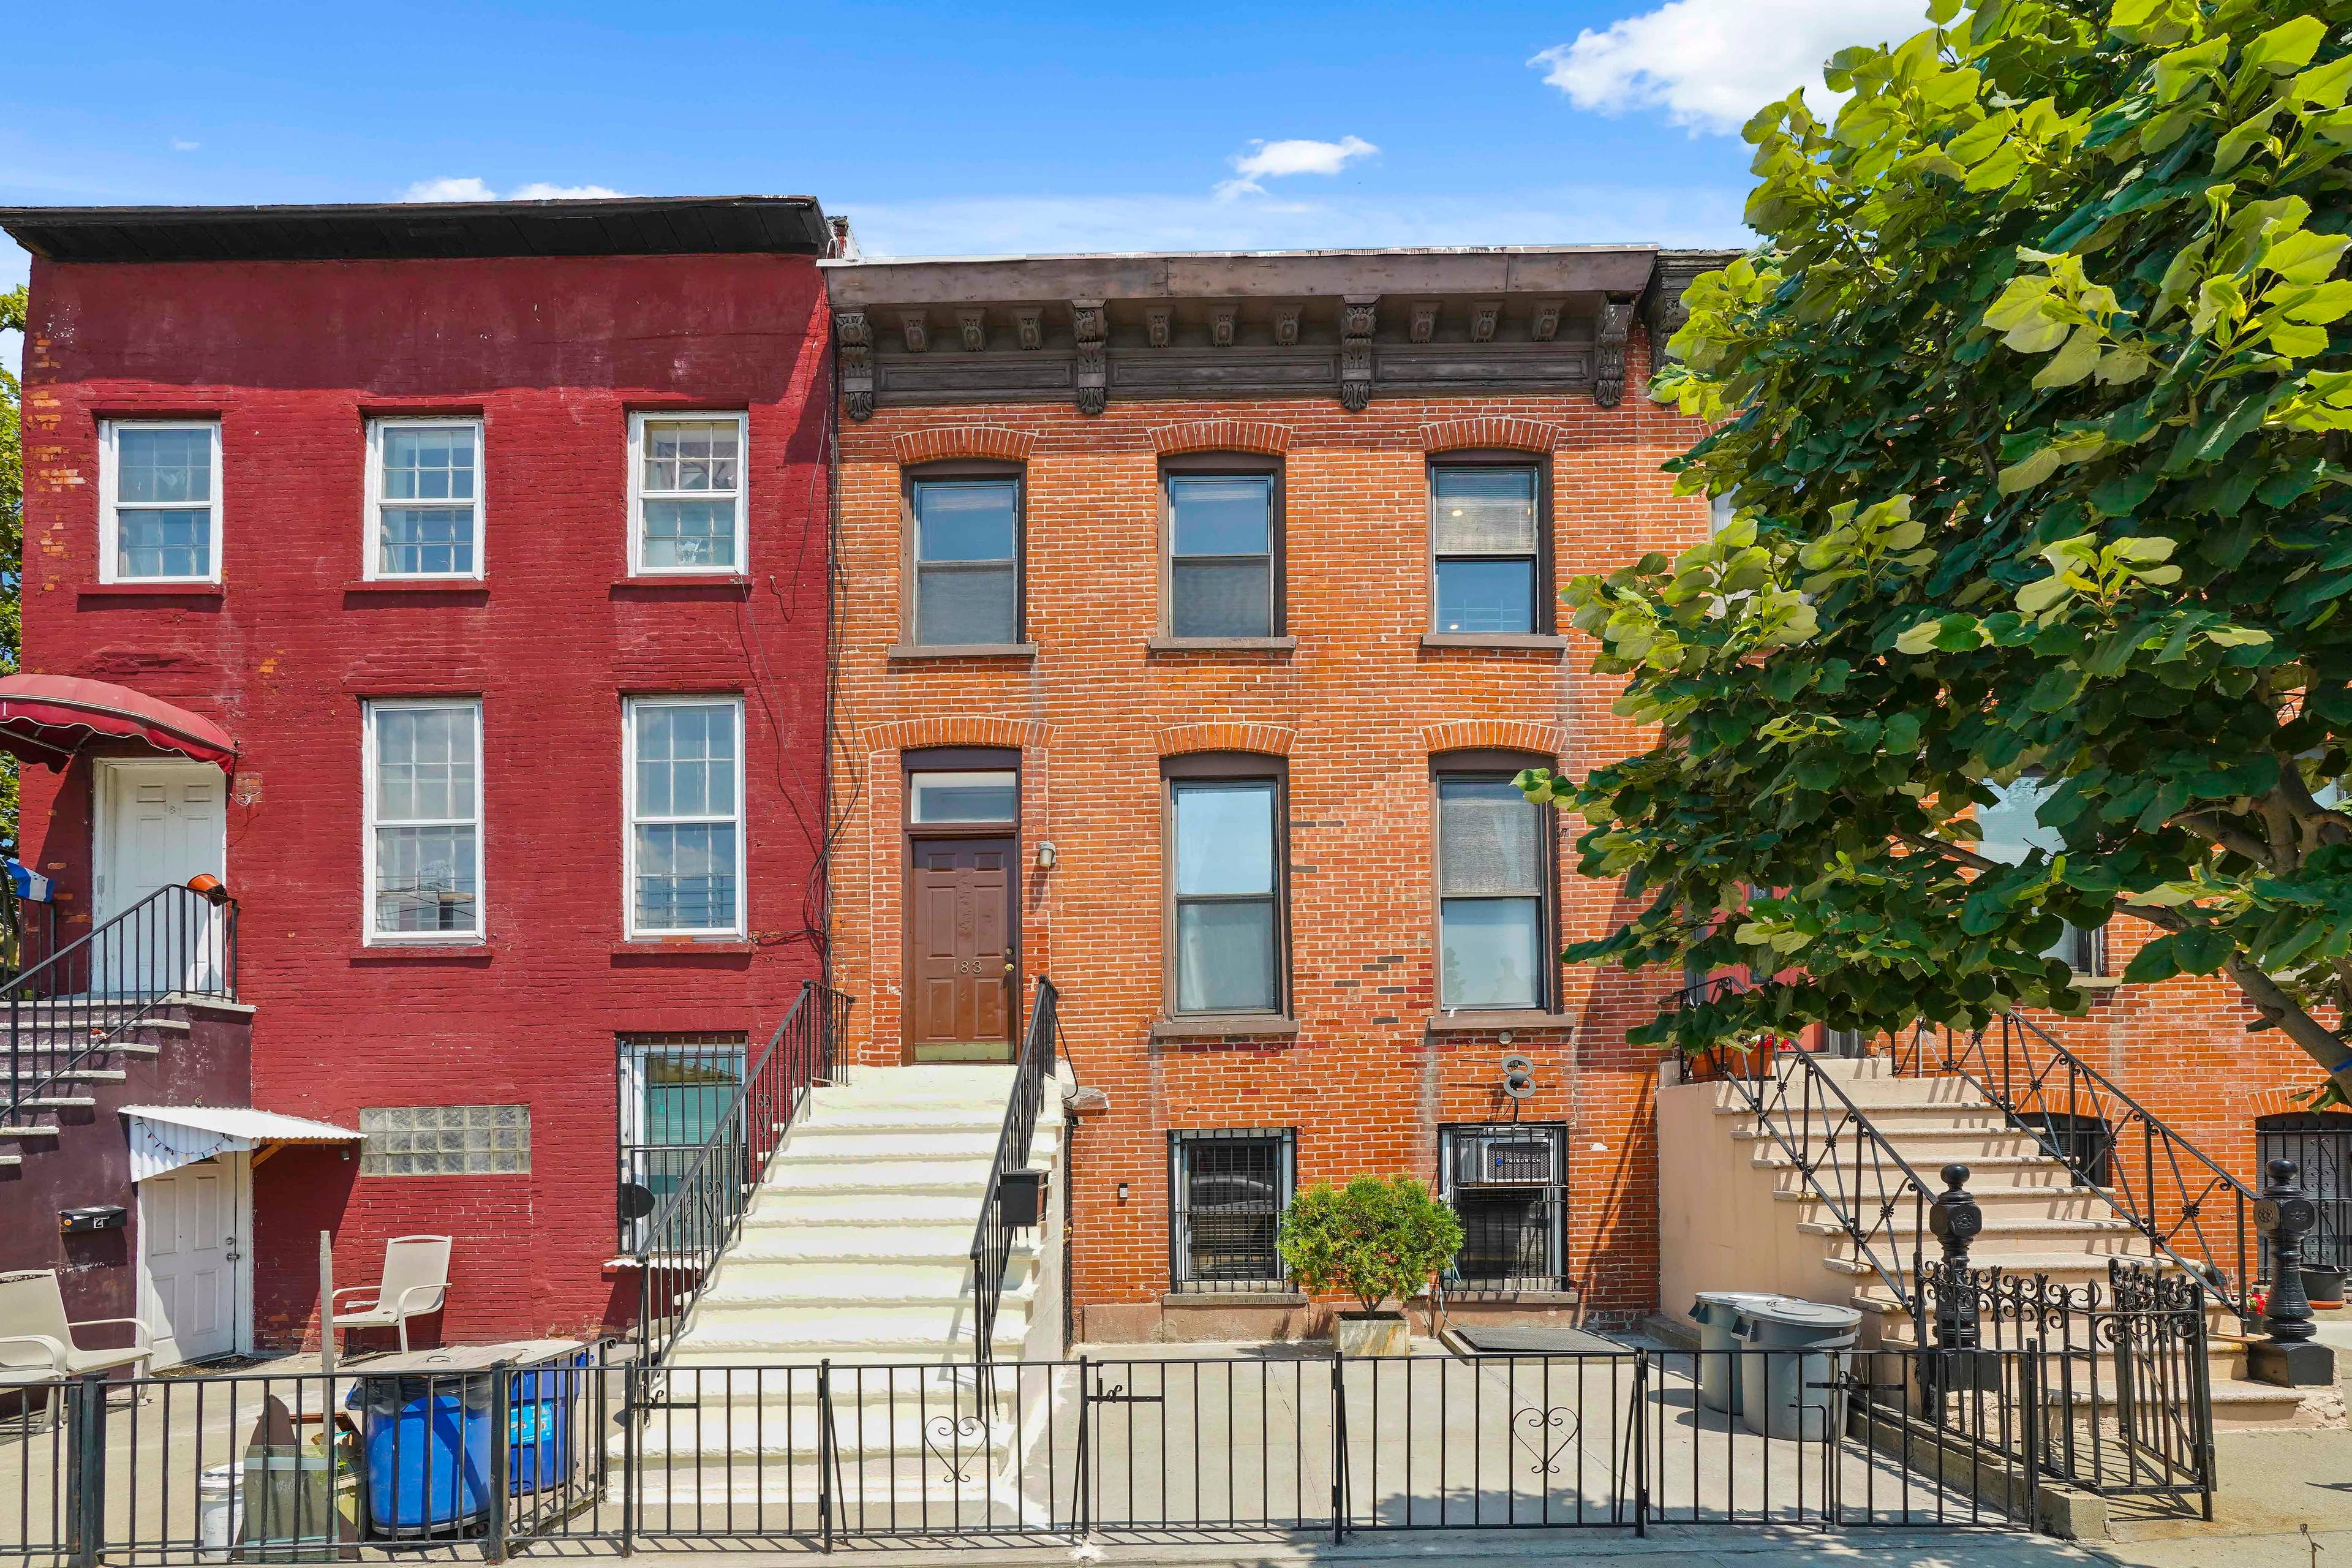 2 family Brick home, located in Greenwood, close to supermarkets, cafes, bodegas, restaurants, just South of Park Slope and North of Industry City.